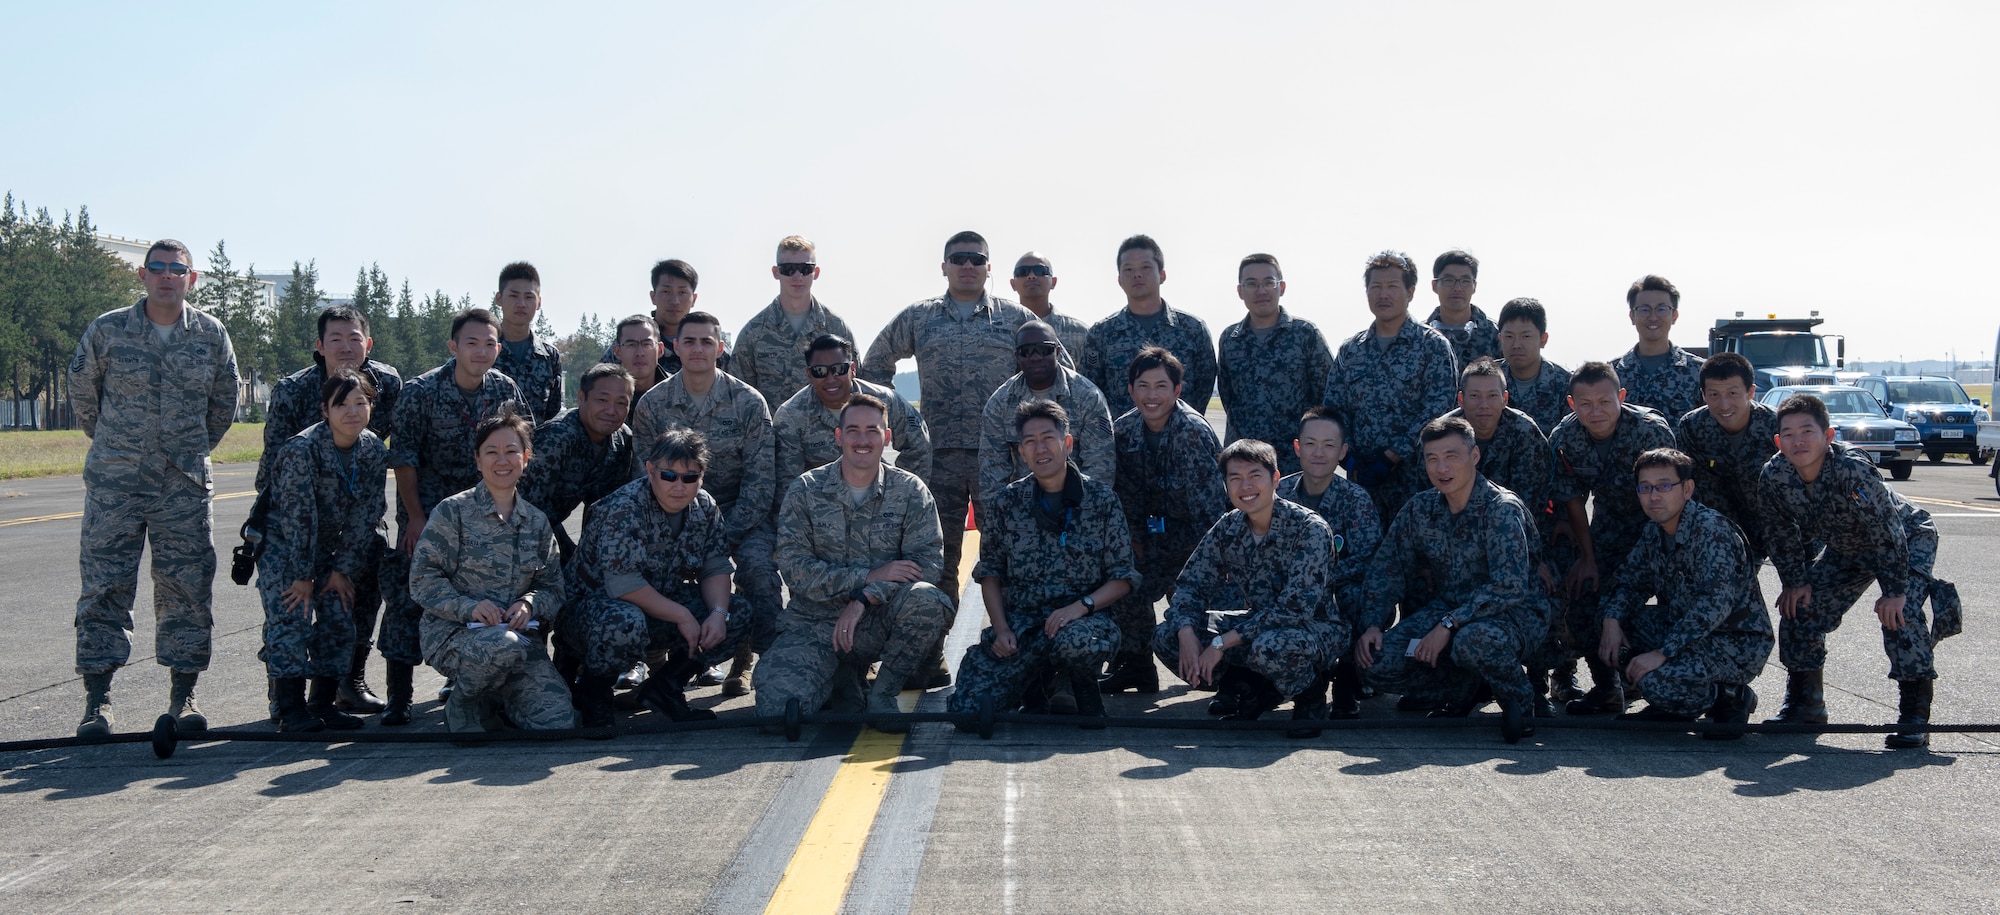 Airmen from the 374th Civil Engineer Squadron and service members from the Koku Jietai (Japan Air Self-Defense Force) pose for a group photo at the completion of the Mobile Aircraft Arresting System (MAAS) at a bilateral training event at Yokota Air Base, Japan, Oct. 25, 2018.